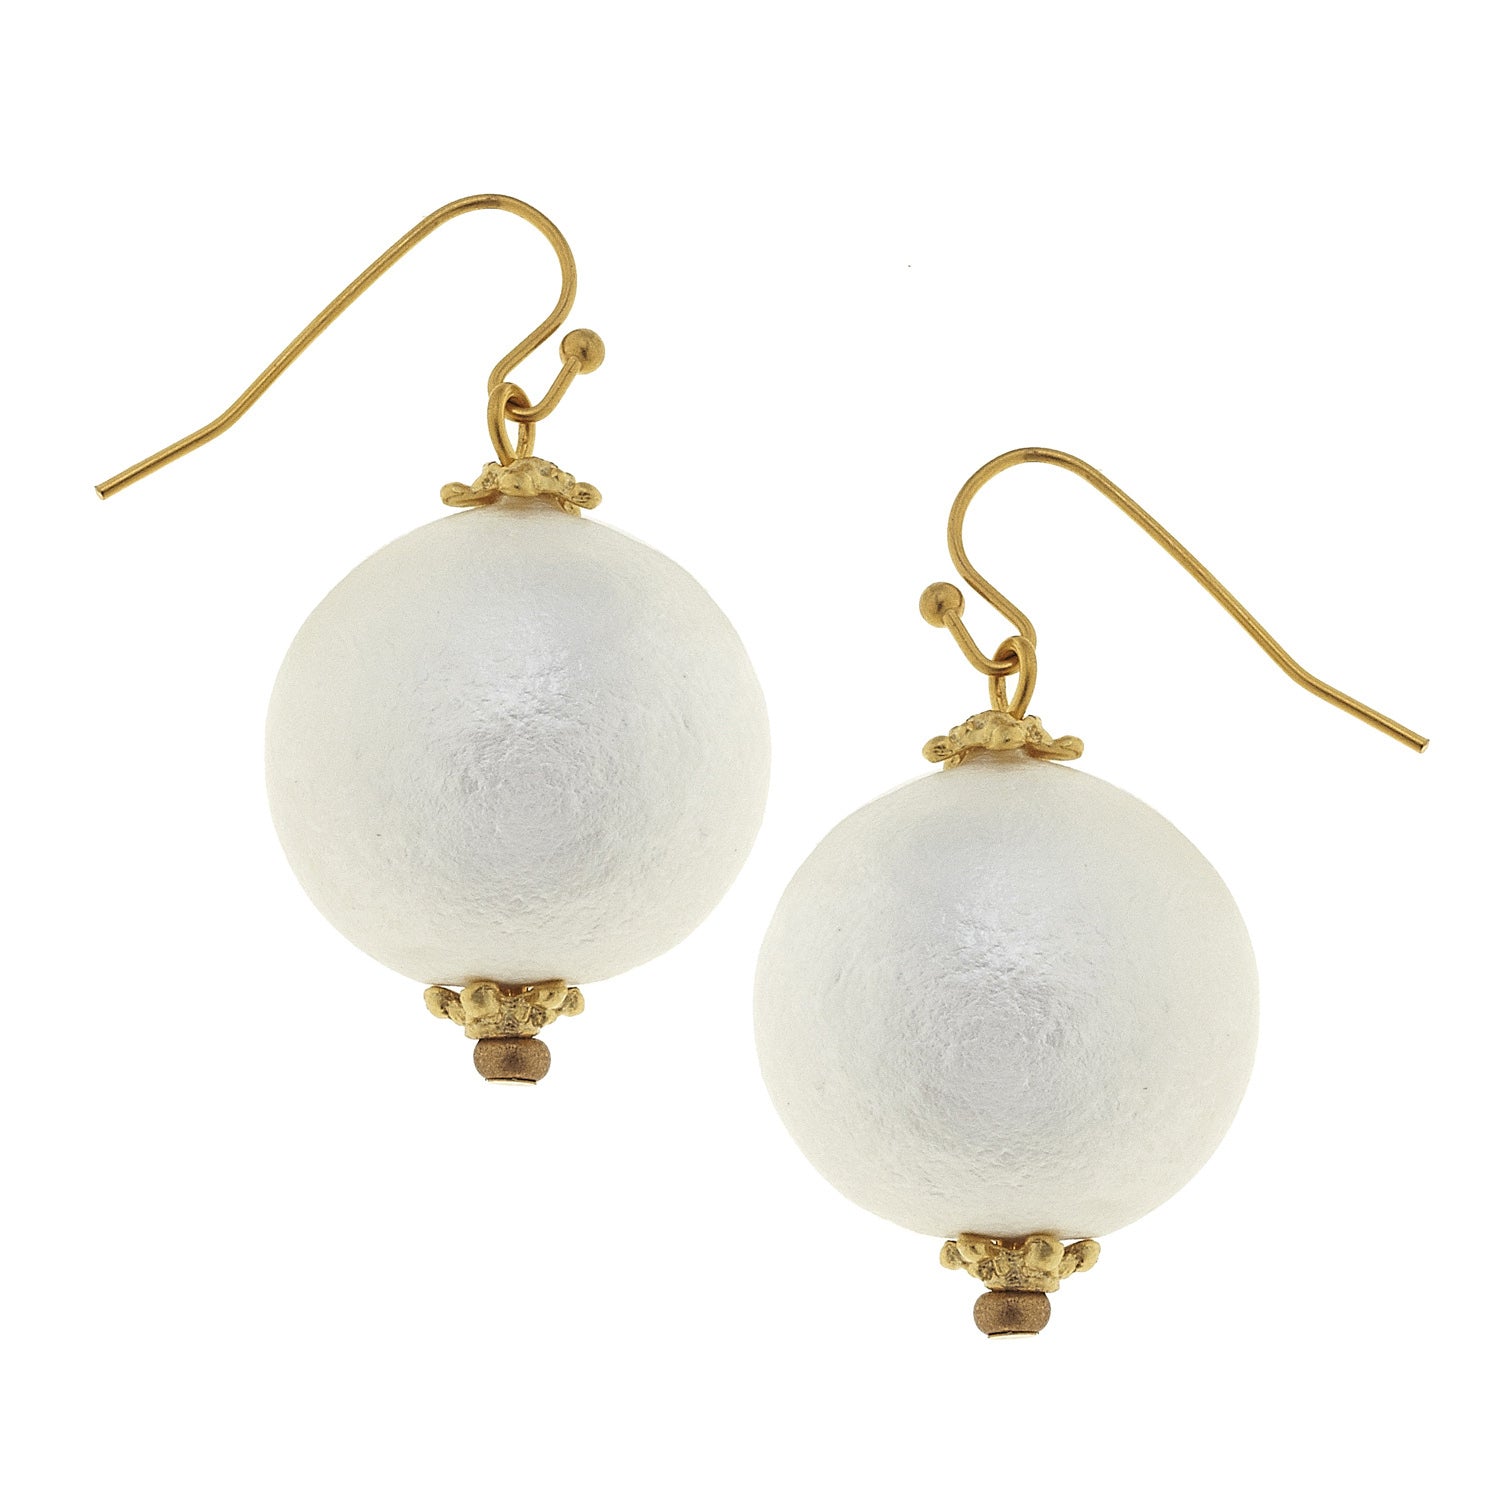 Susan Shaw Jewelry Pearl Earrings, White Cotton Pearl in Gold